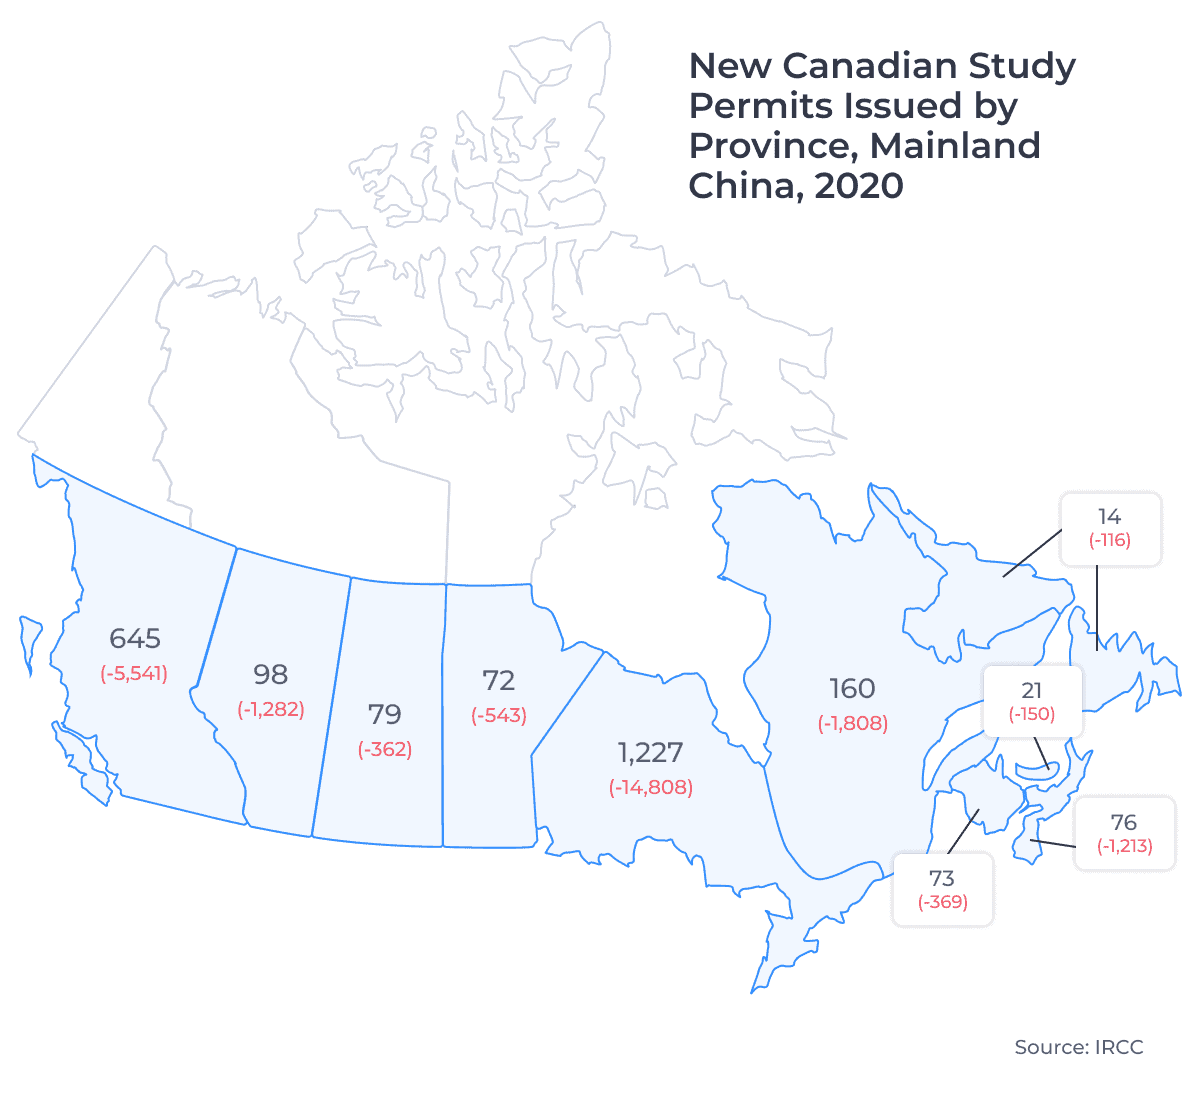 Map showing the distribution of new Canadian study permits issued to Mainland China residents by province of study in 2020. Examined in detail below.